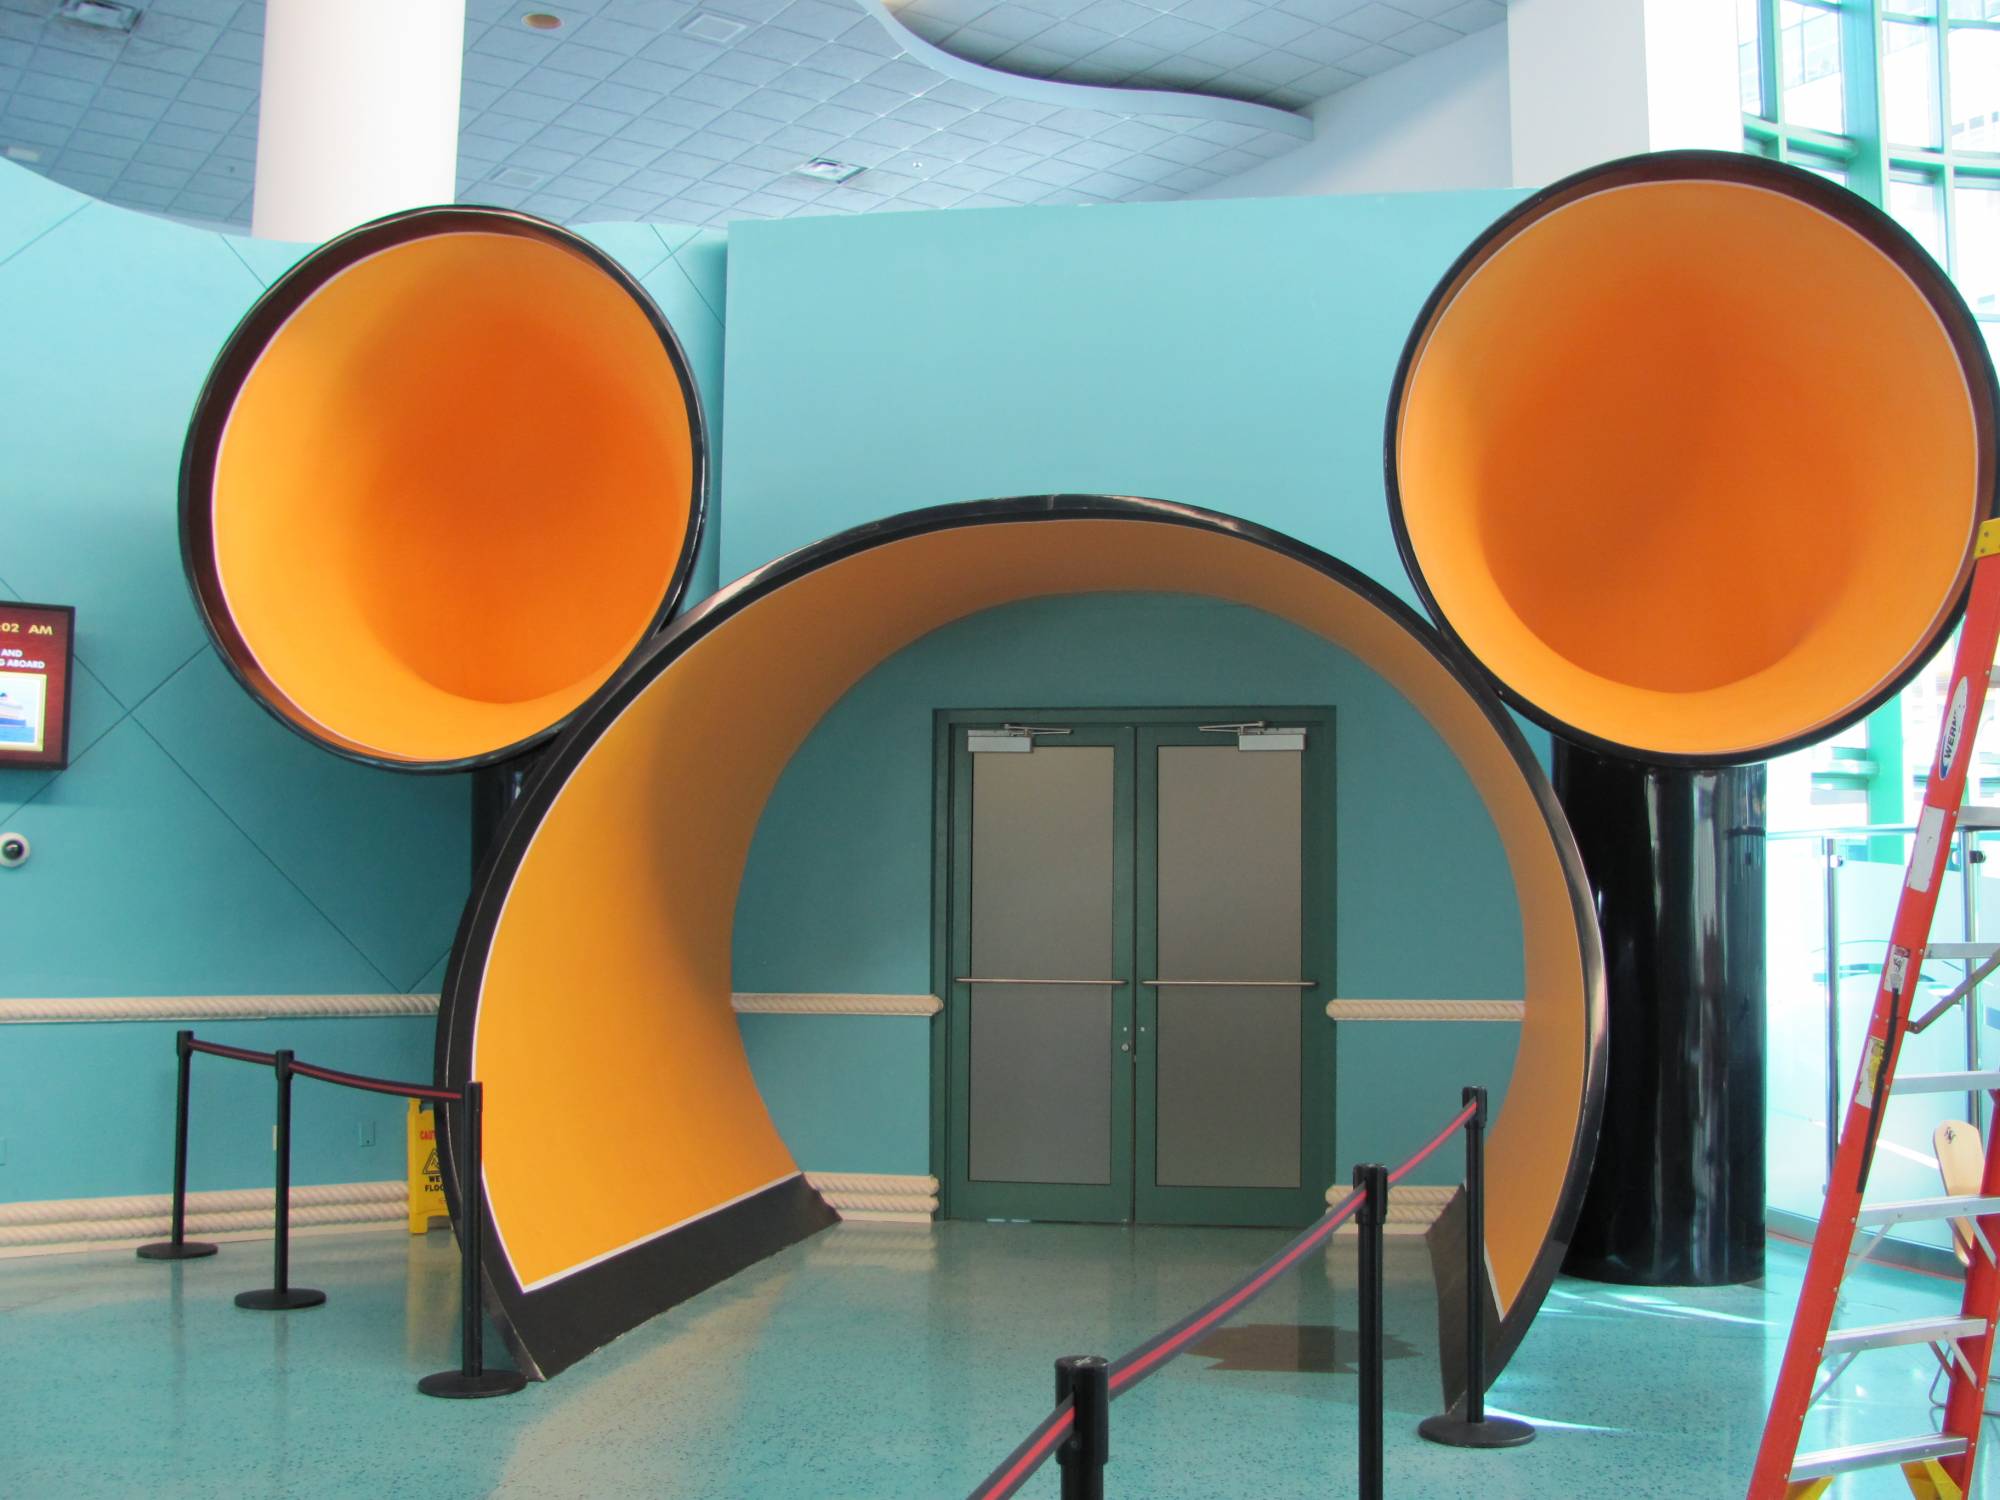 Entryway to the Ship In the DCL Terminal